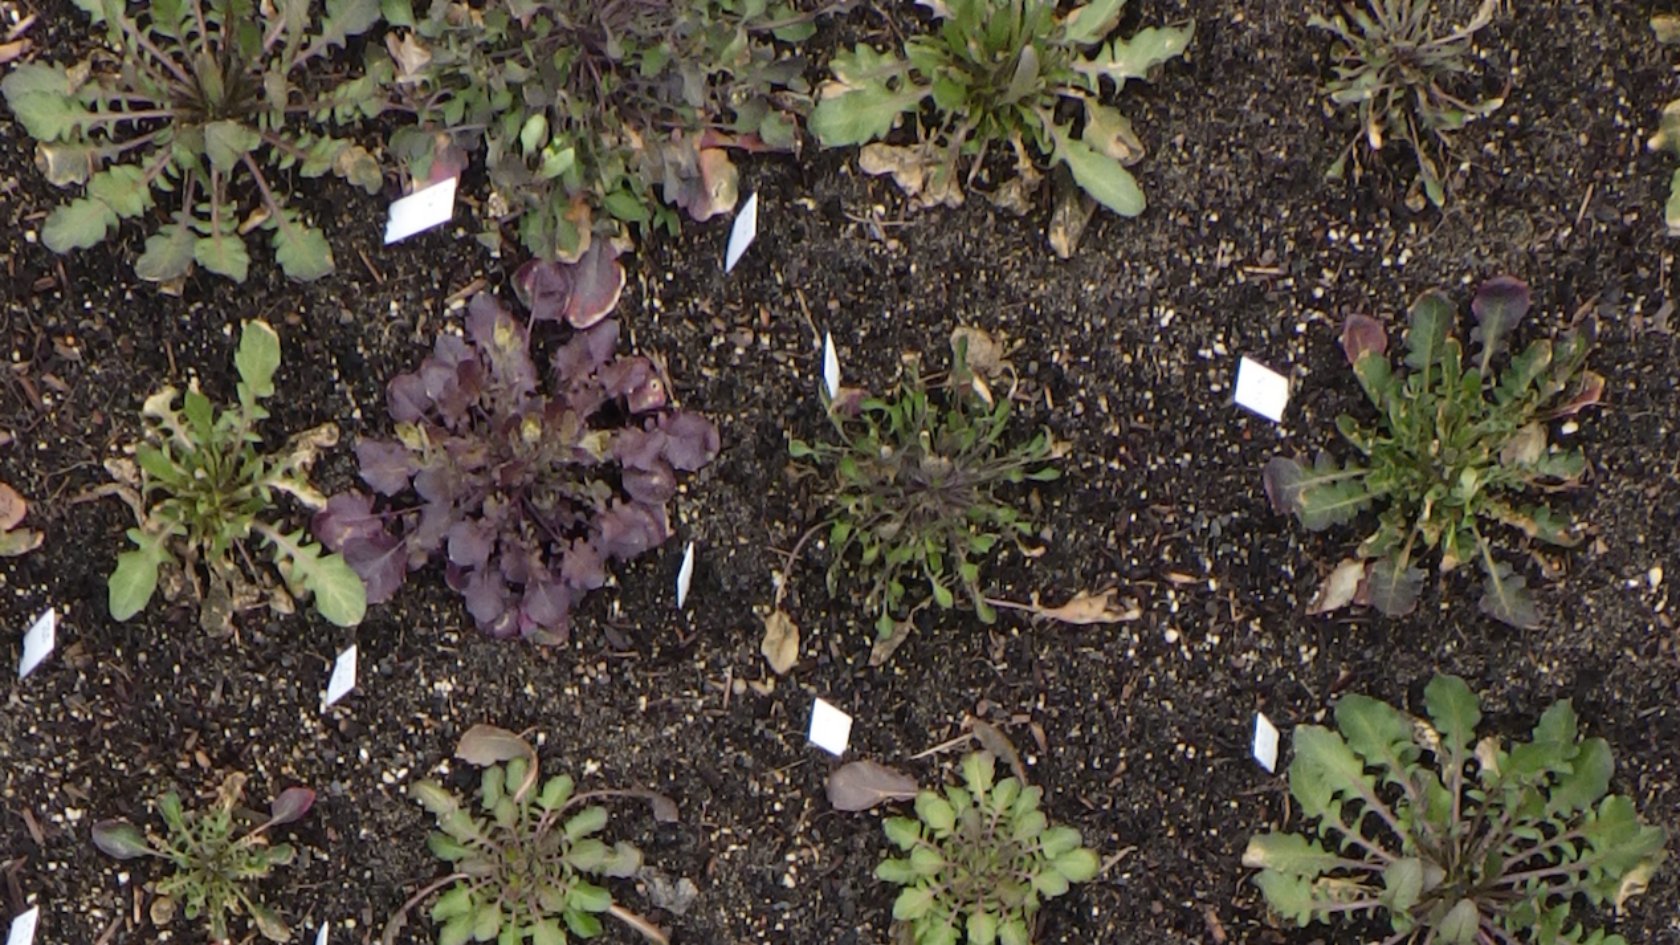 Arabidopsis plants on the experimental plots of UZH’s Irchel Campus with red pigmentation